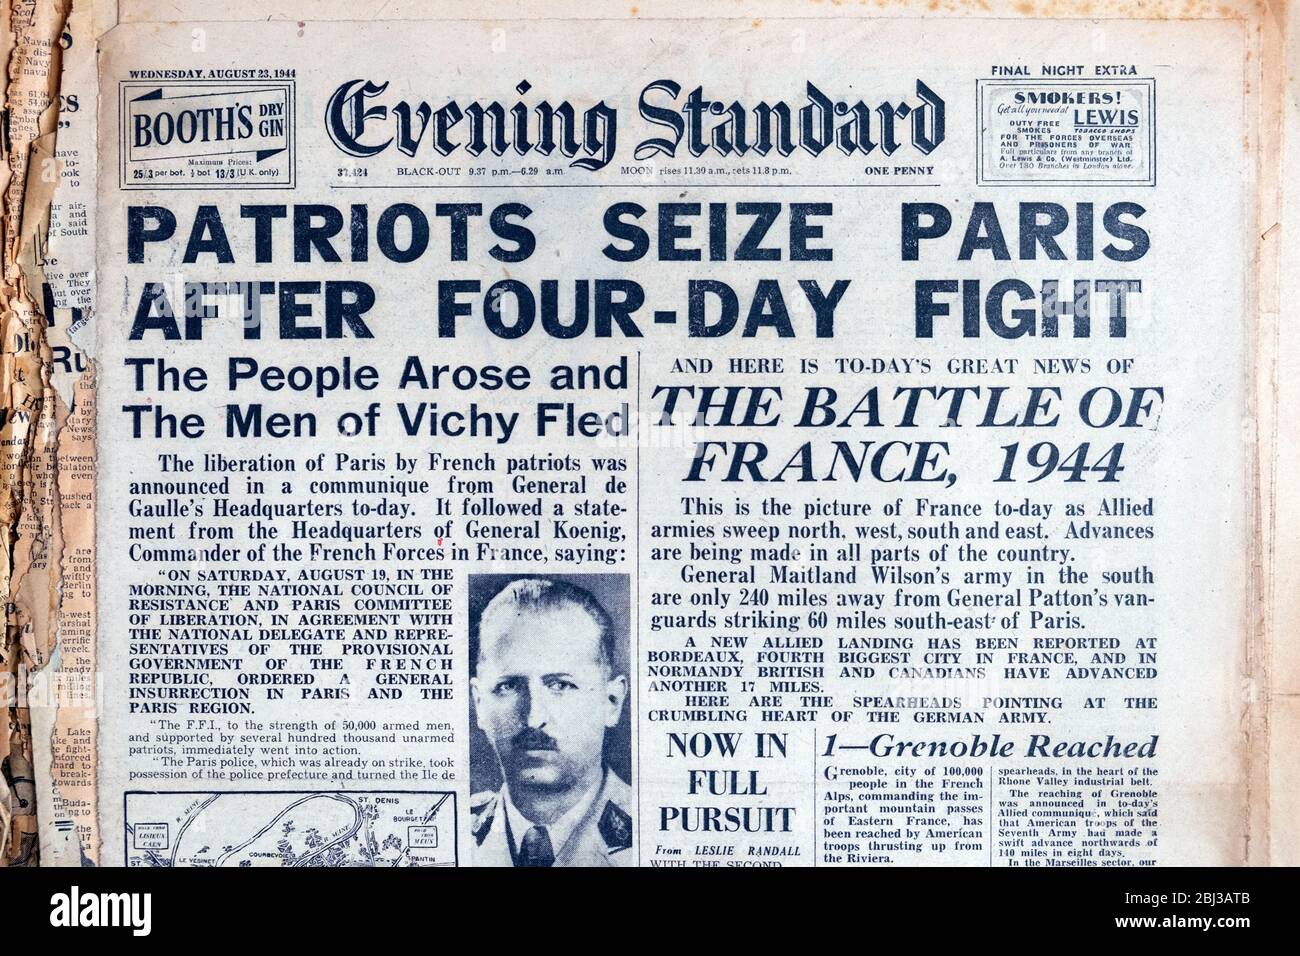 'Patriots Seize Paris After Four-Day Fight' 'The Battle of France 1944'  Evening Standard WWII newspaper headlines 23 August 1944 London England UK Stock Photo